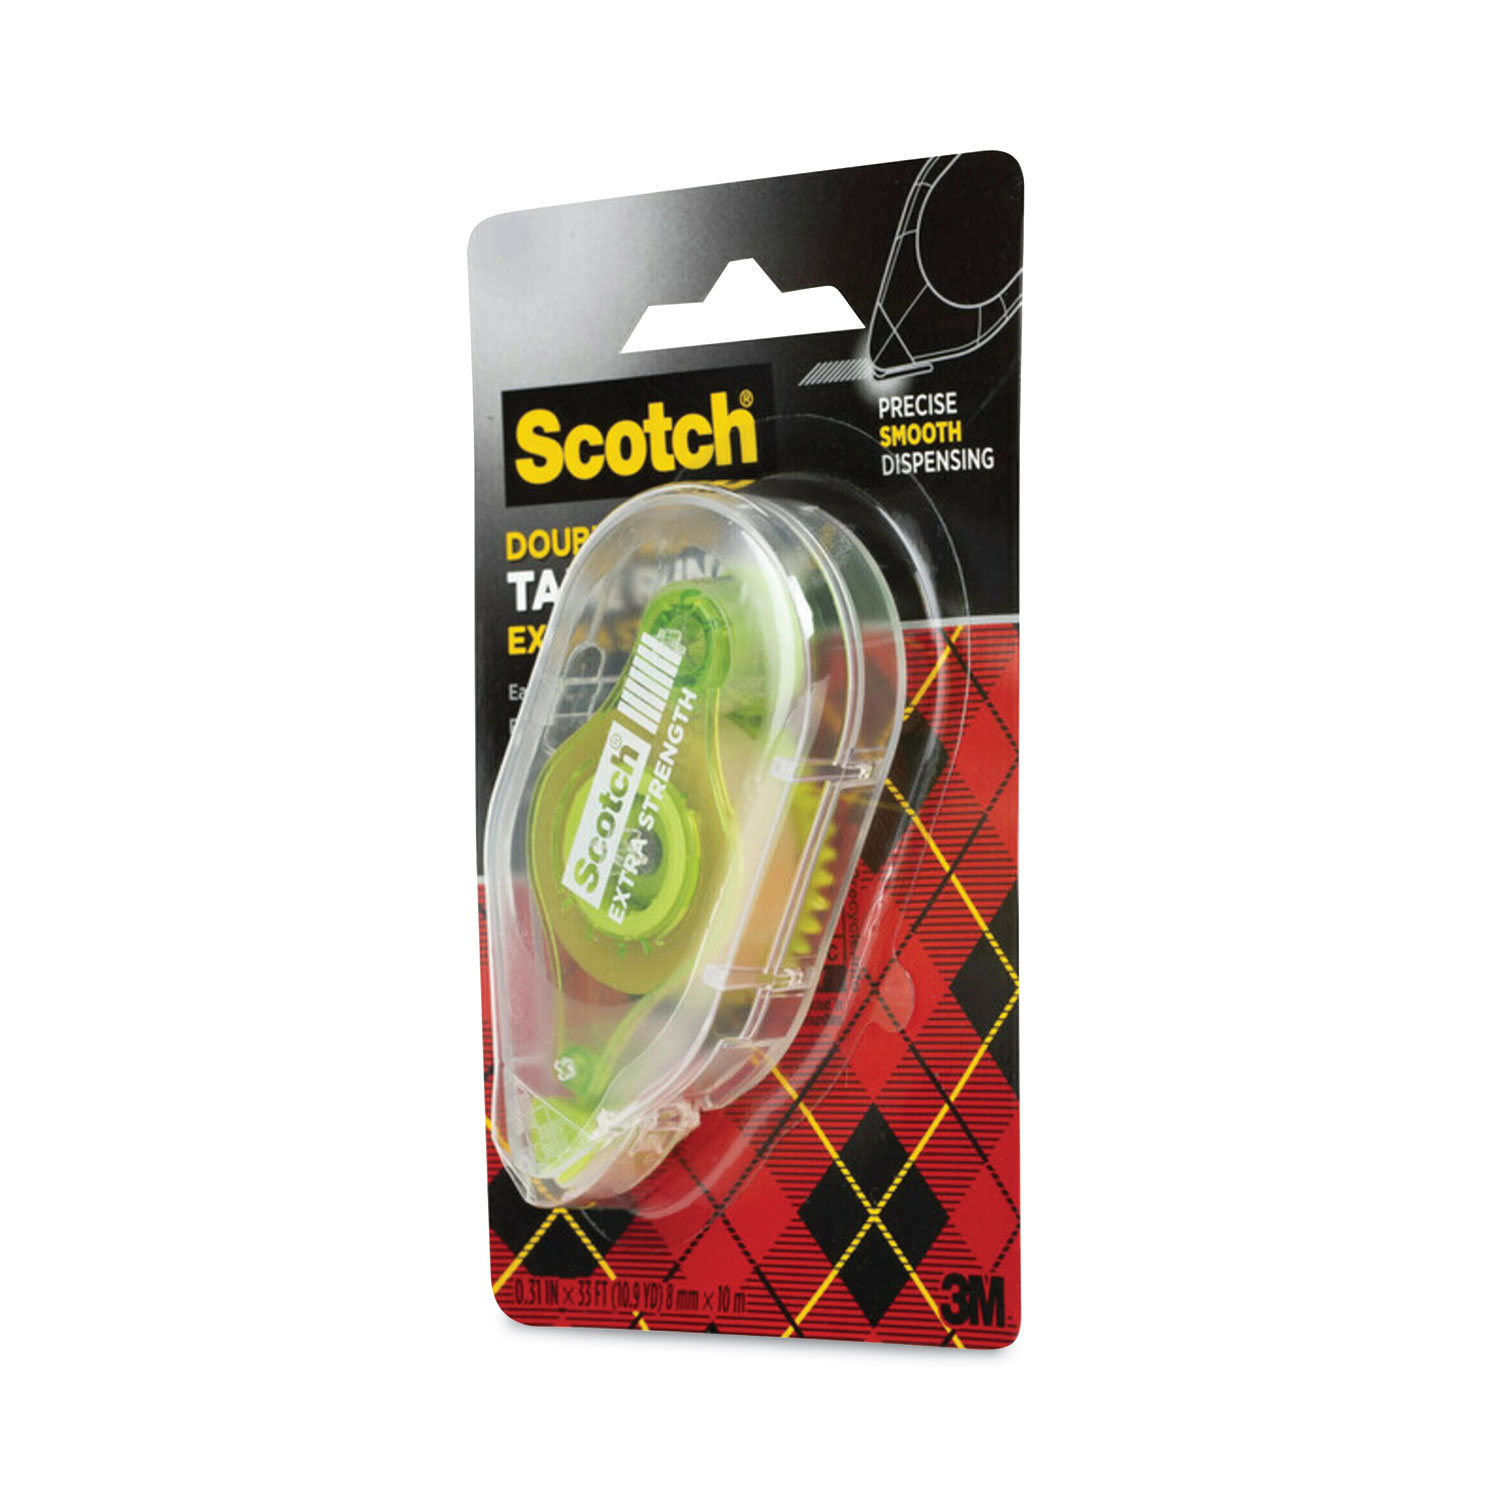 CLEARANCE Scotch Tape Runner Refill.31 in x 16.3 yd (055-R-CFT)